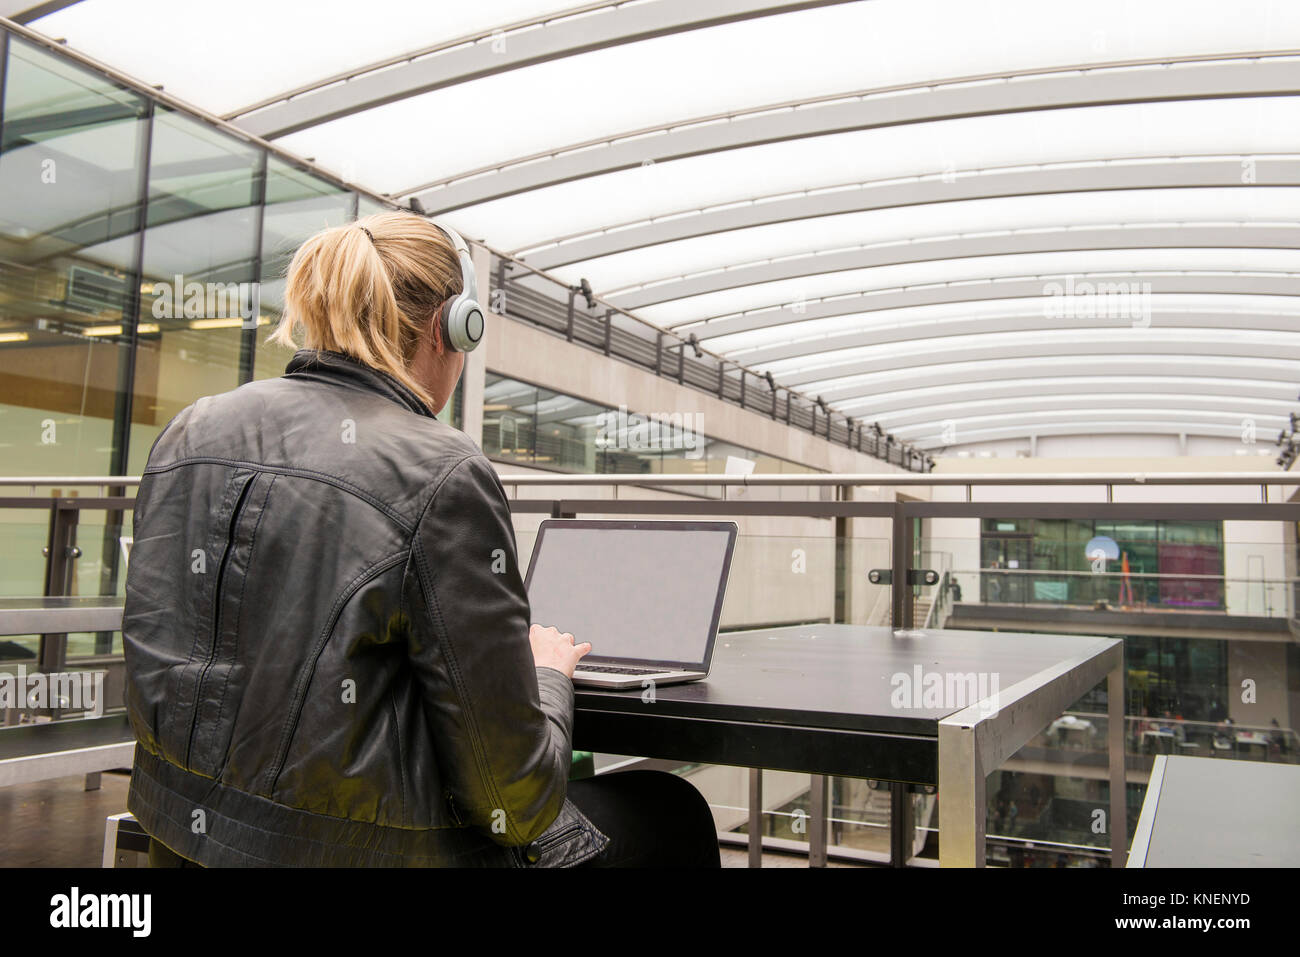 Rear view of woman on mezzanine of office building using laptop Stock Photo